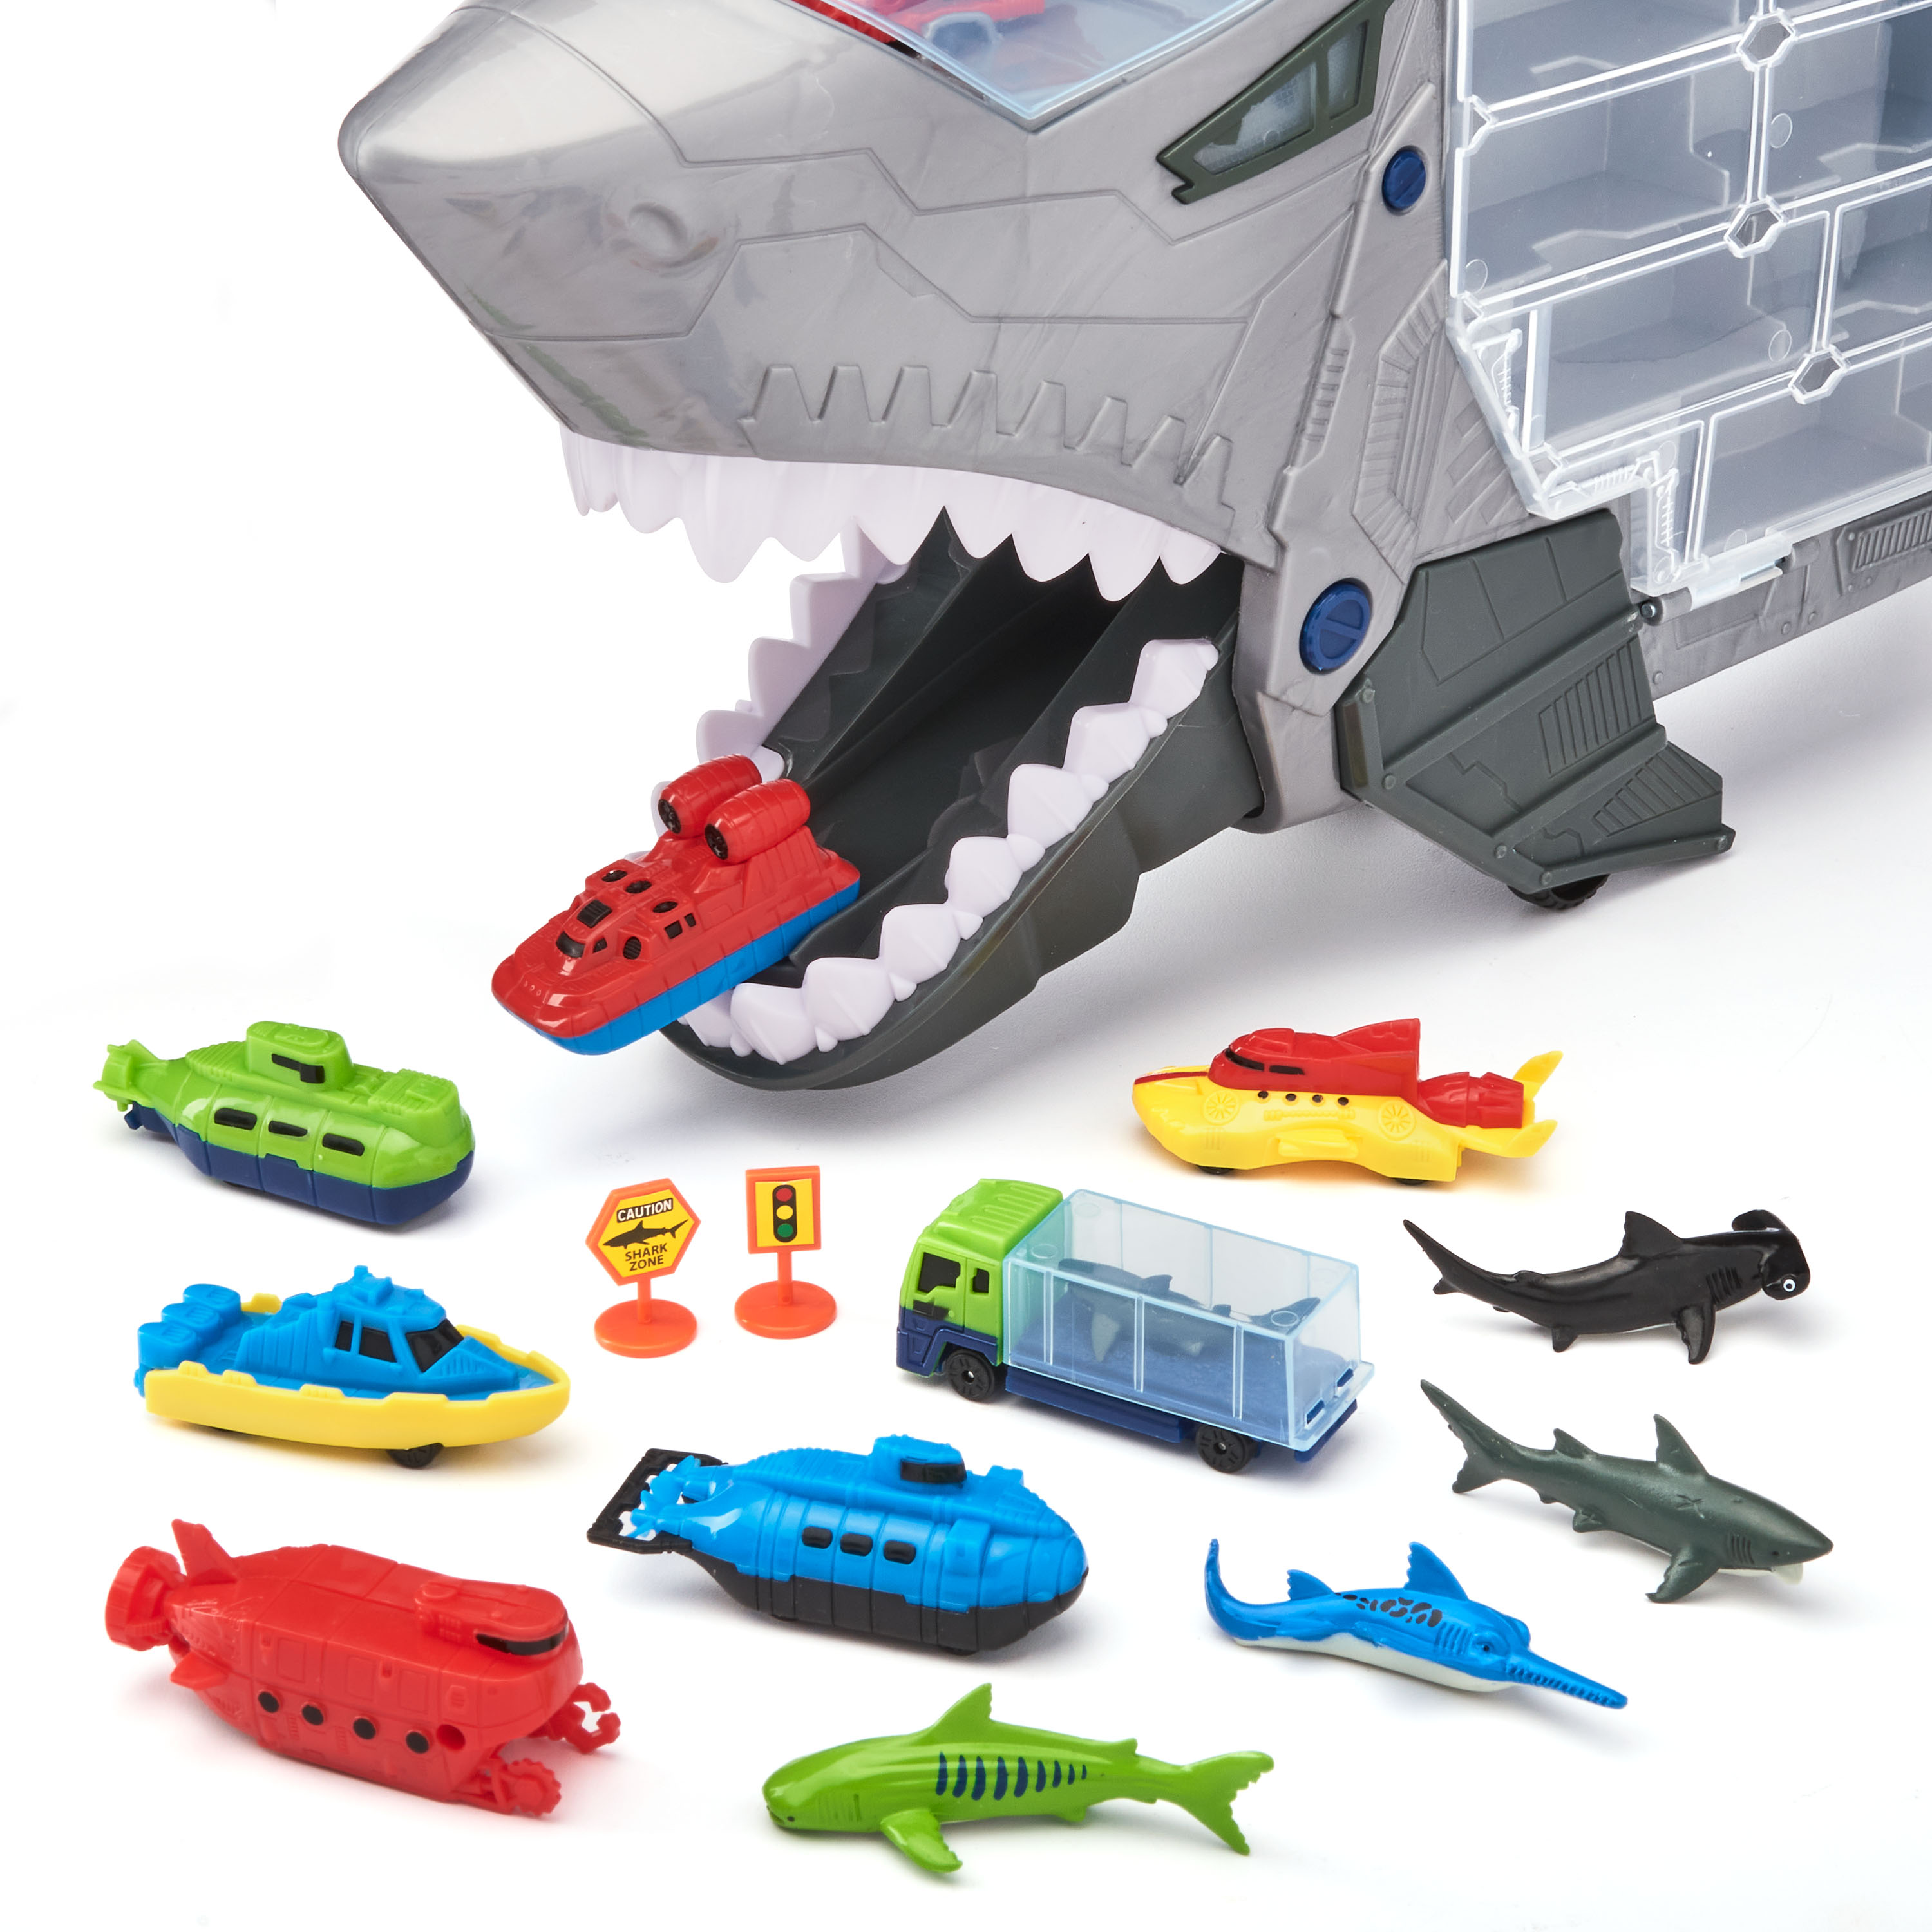 Kid Connection Shark Figure and Vehicle Transporter Play Set, 18 Pieces - image 4 of 6